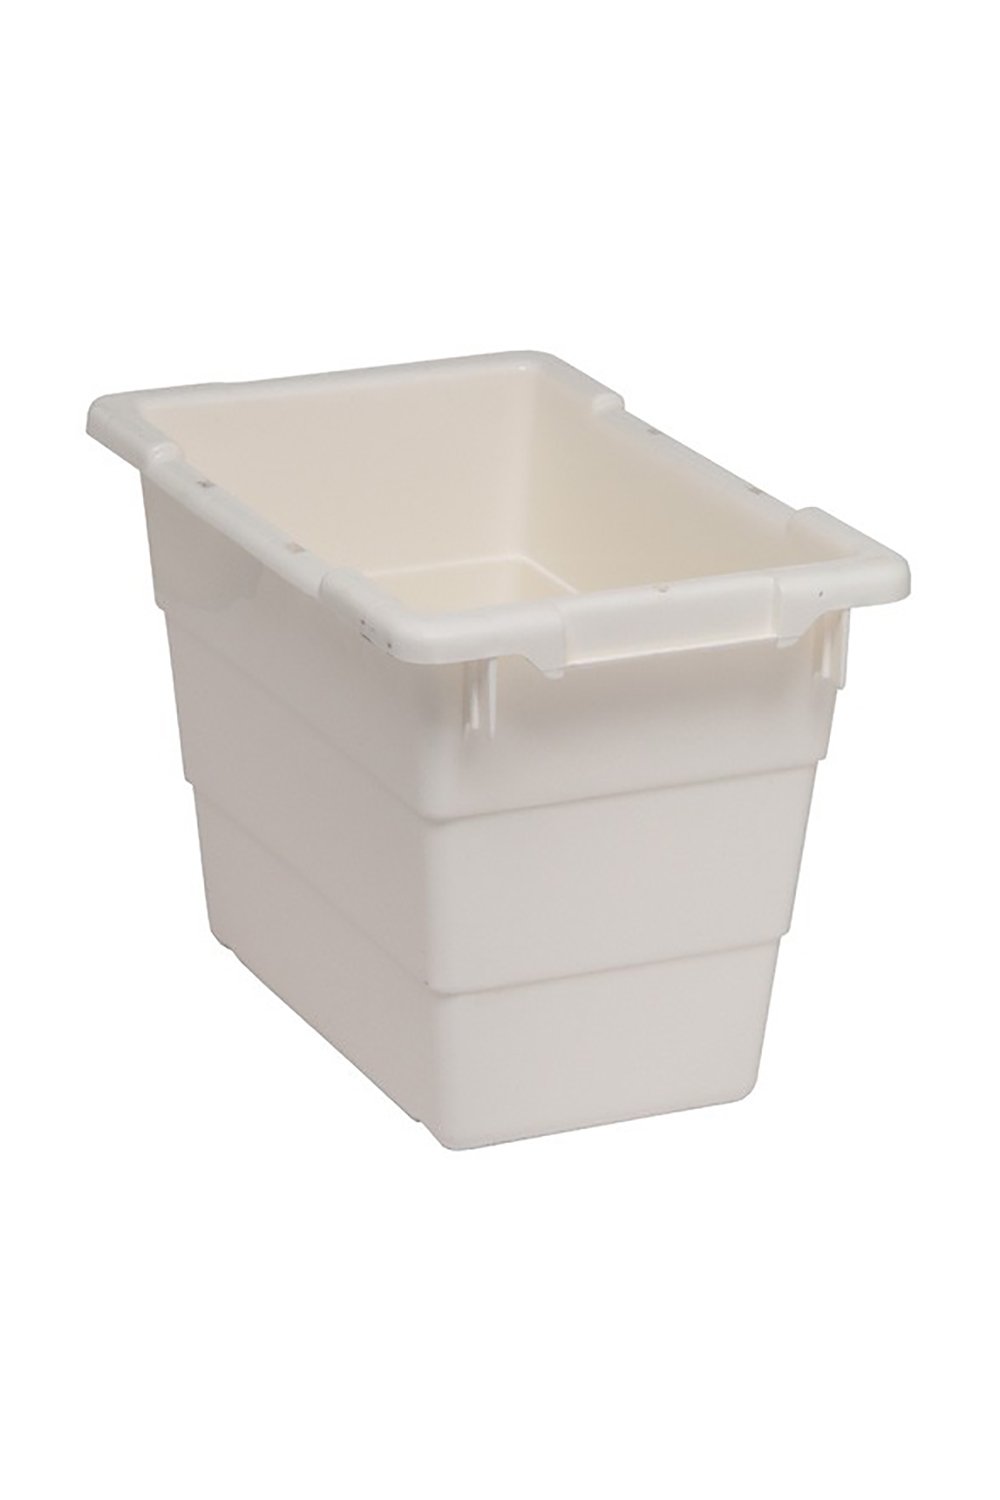 Cross Stack Tub Bins & Containers Acart 17-1/4"L x 11"W x 12"H White 